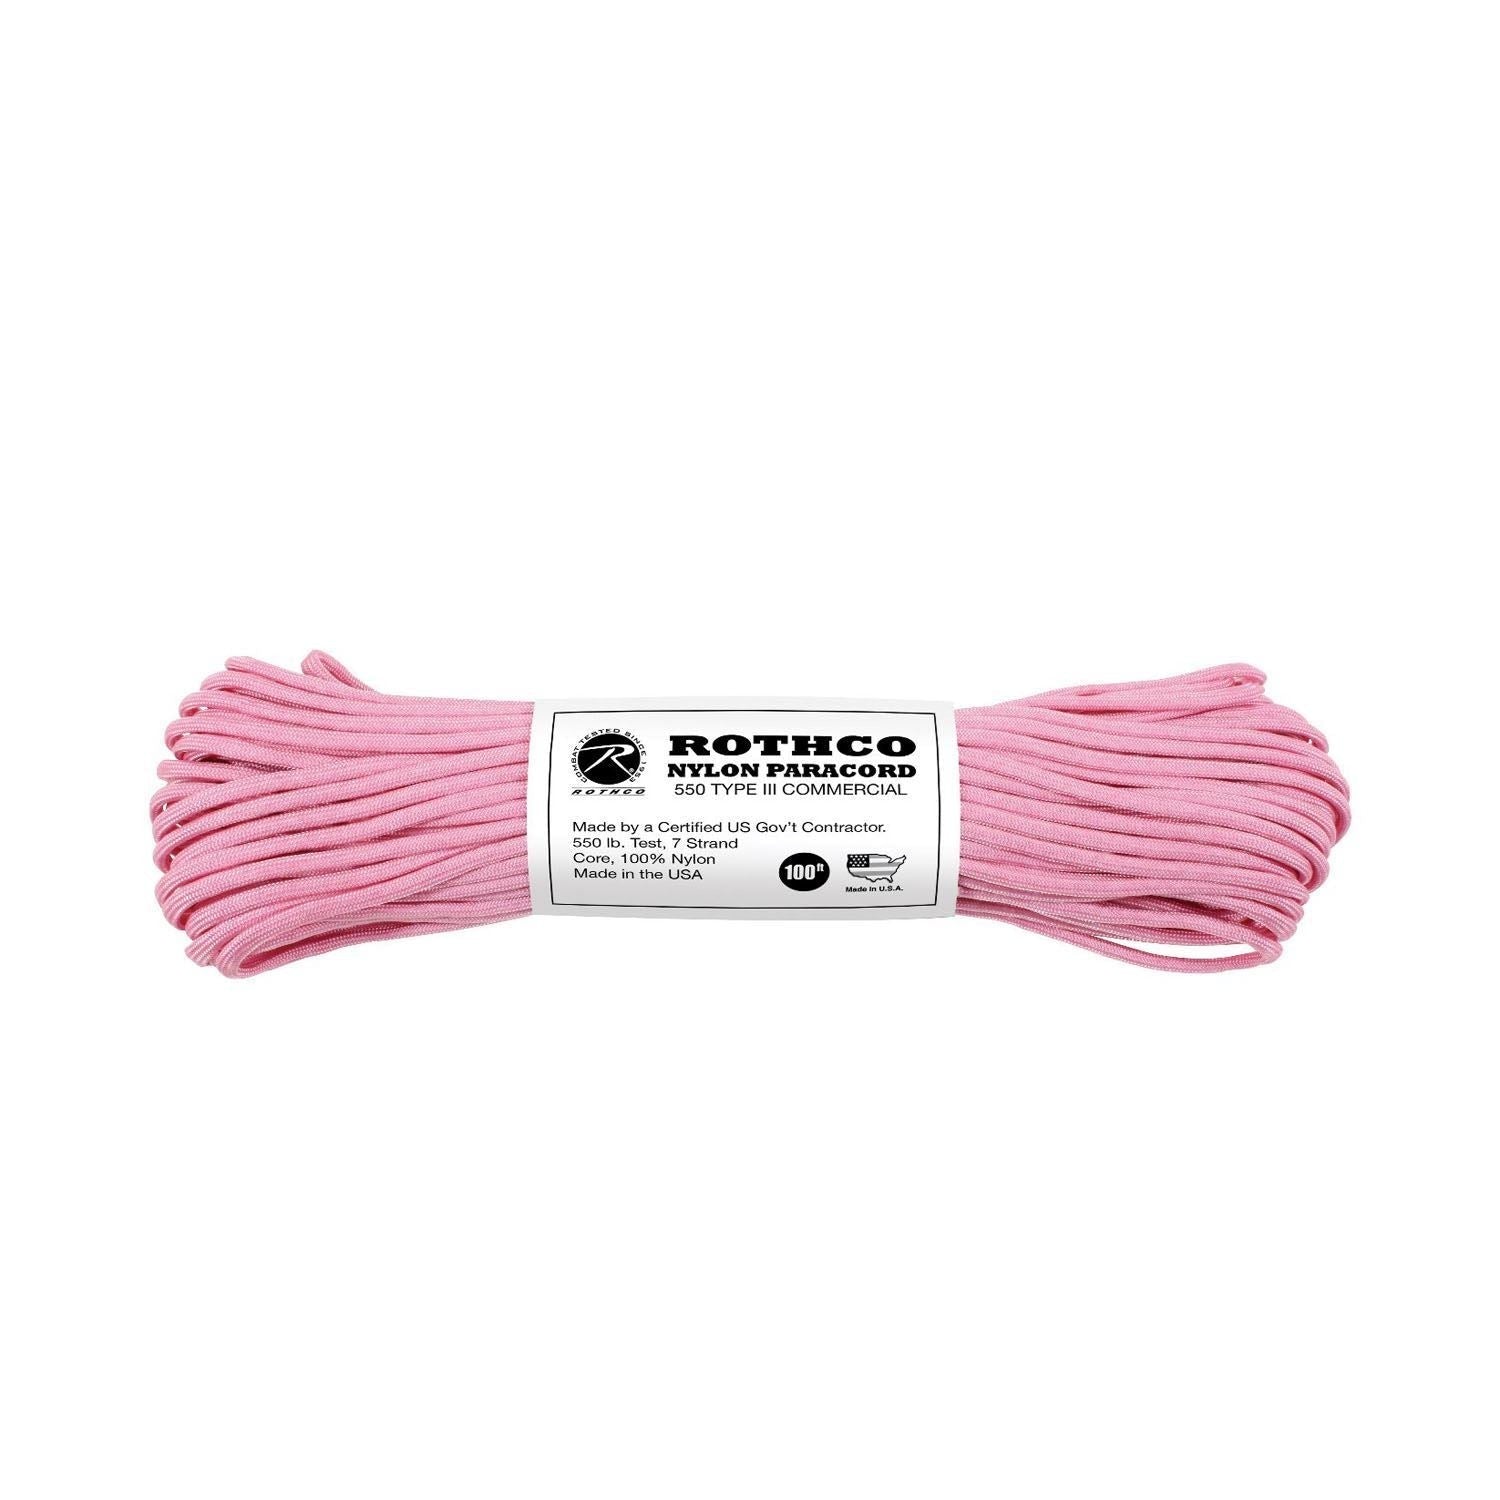 Nylon Paracord - Rose Pink 100ft Type III 550 lb. (5 Per Pack)